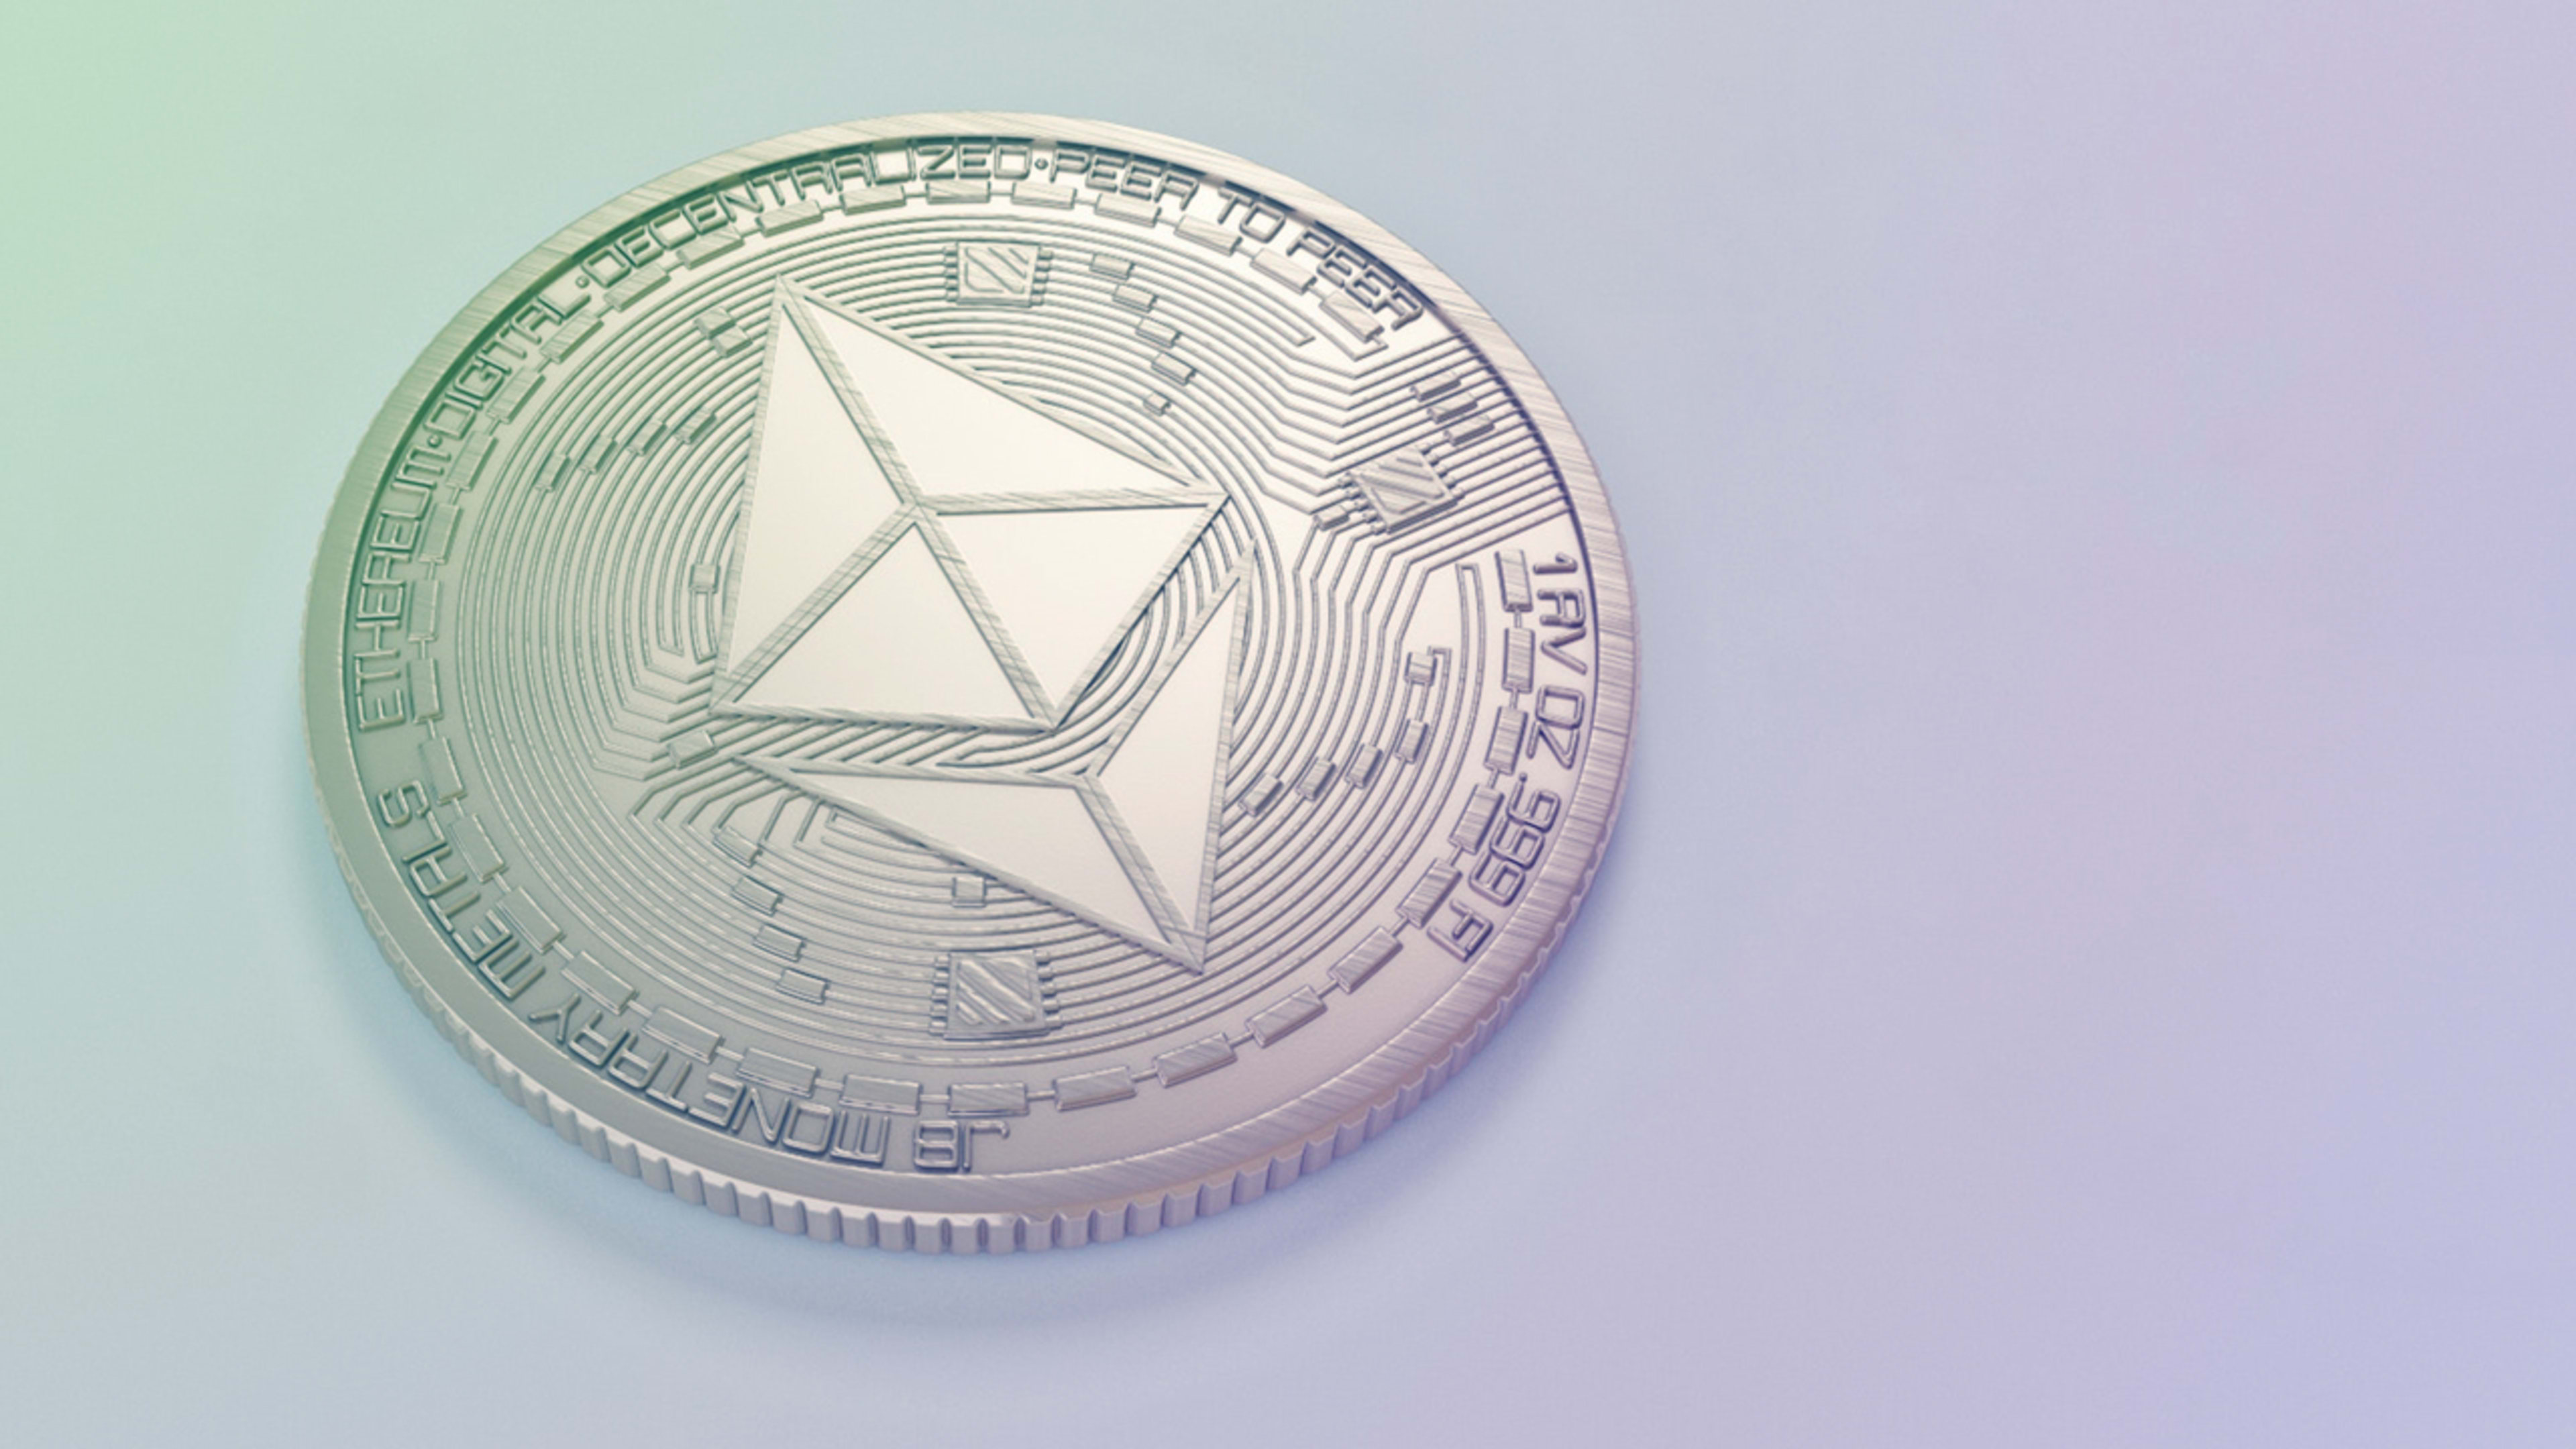 Ethereum price is spiking after an SEC official declared it is not a security